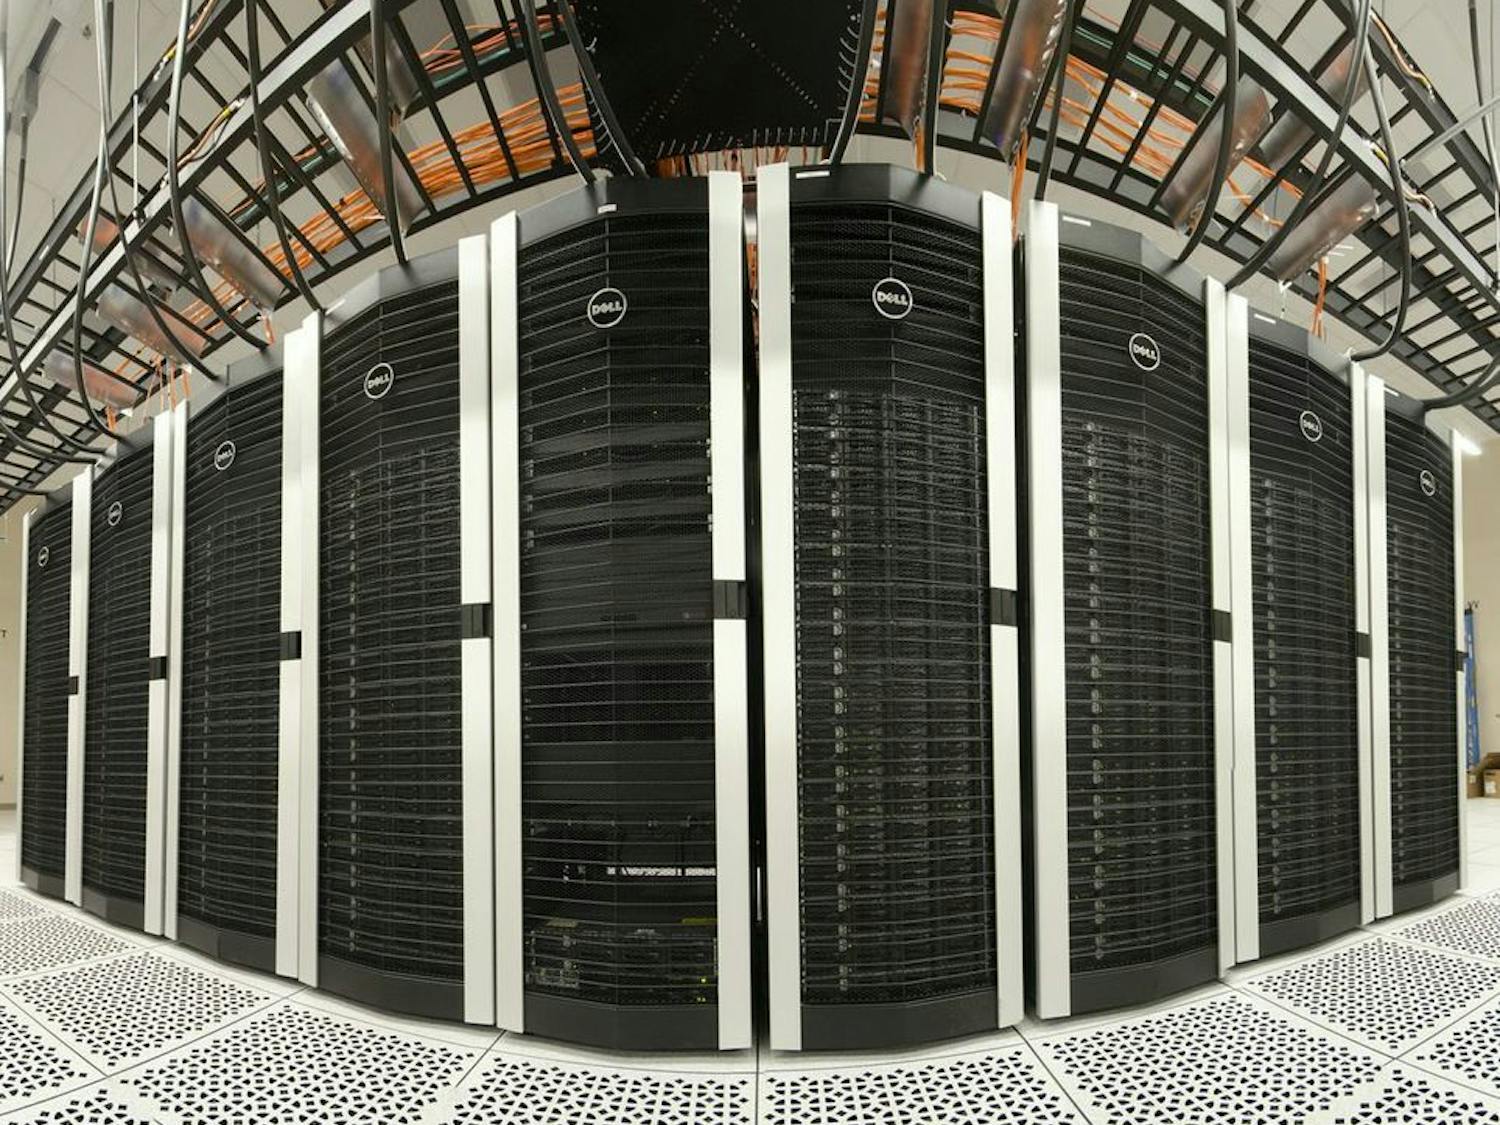 UF’s HiPerGator, a $9 million supercomputer, was created in 2013. It is the third-fastest U.S. university supercomputer and costs $2.5 million to run annually.
&nbsp;